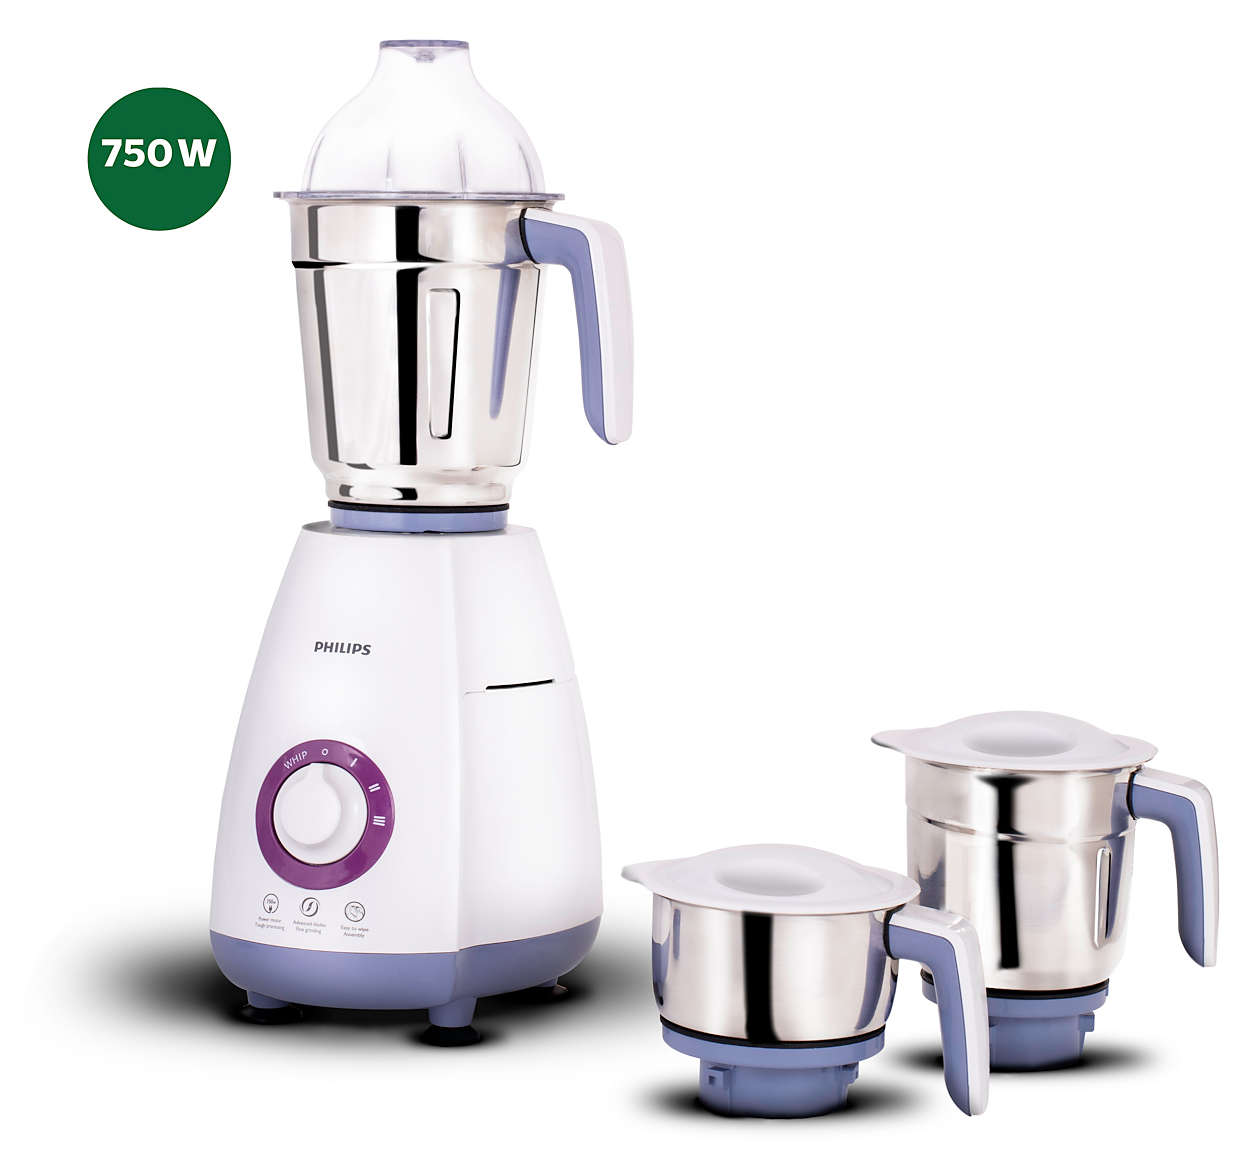 Mixer Grinder of Fastest & finest mixing grinding